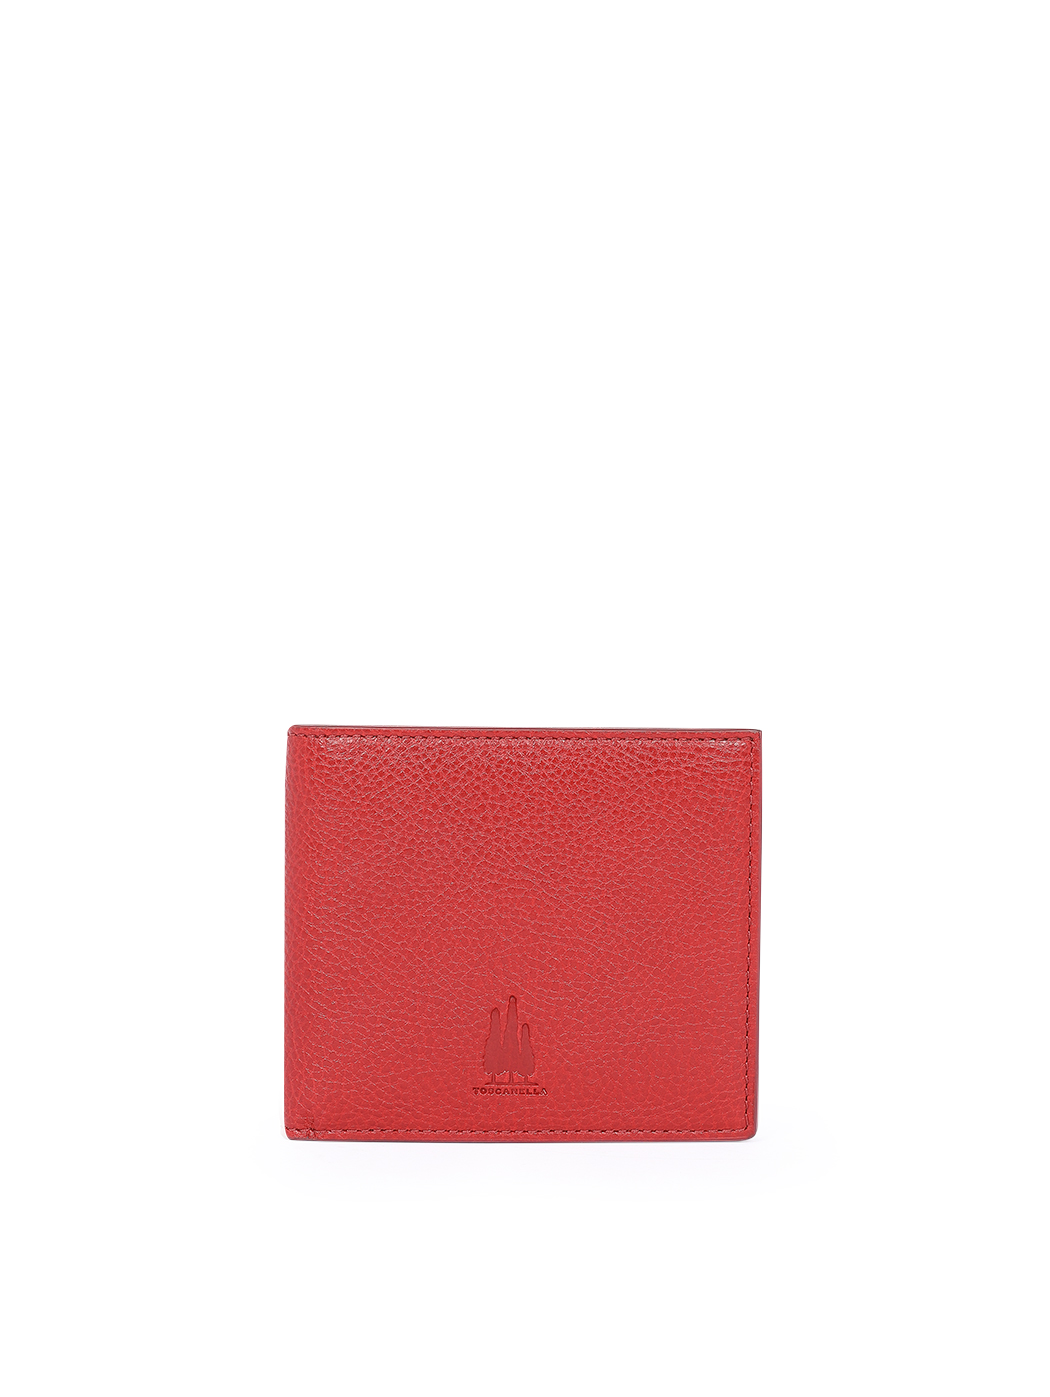 Billfold Wallet in Leather  Red